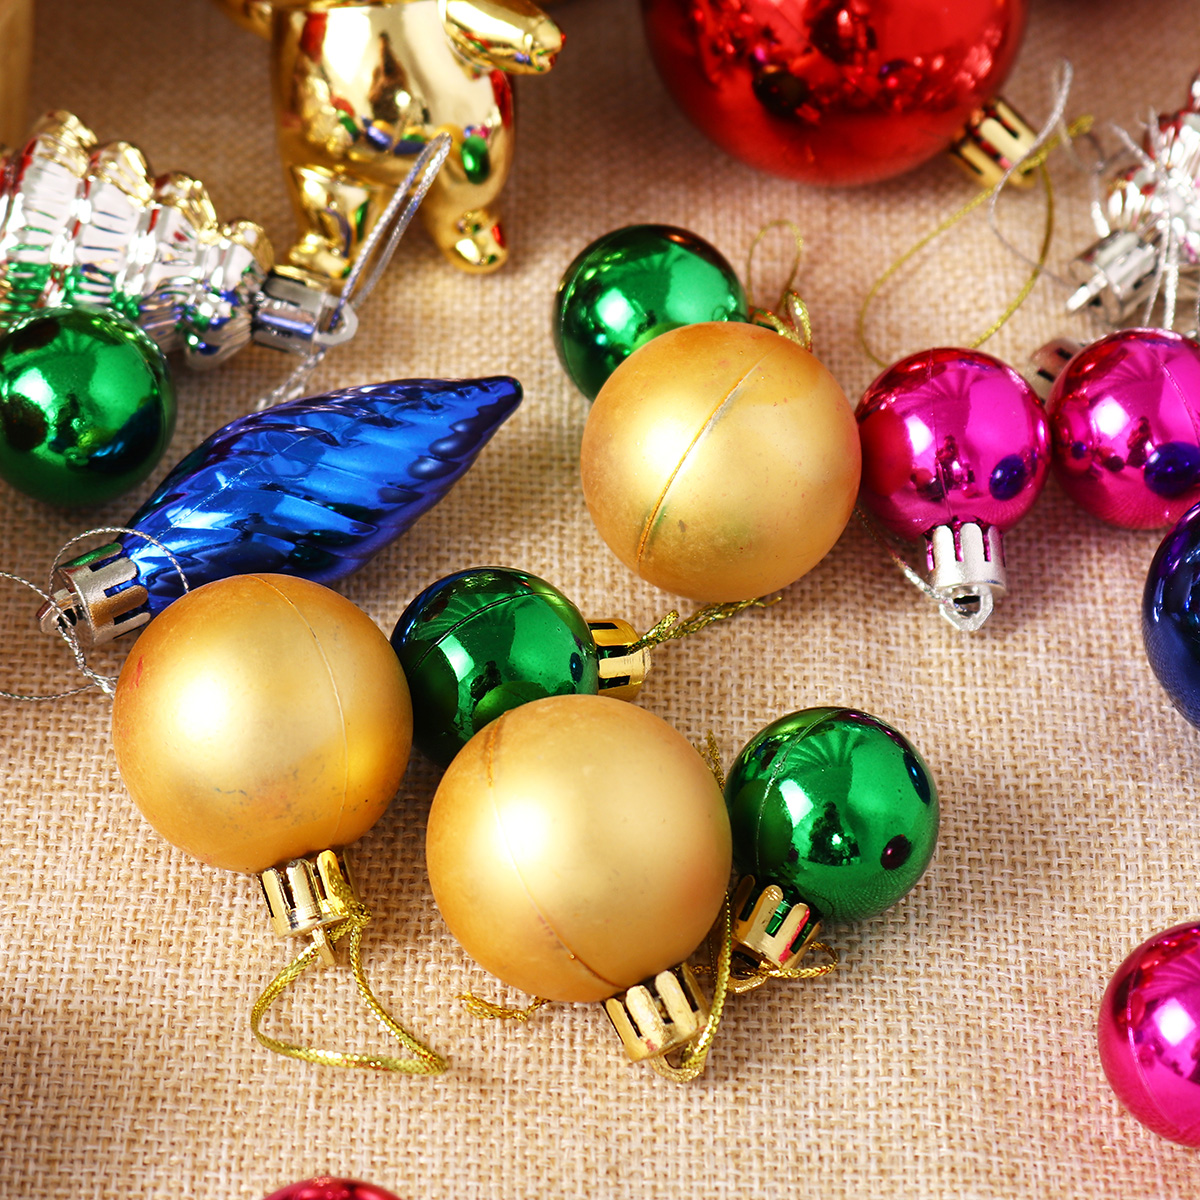 30-PcsSet-Glitter-Christmas-Tree-Ball-Baubles-Colorful-for-Xmas-Party-Home-Garden-Christmas-Decorati-1770980-6